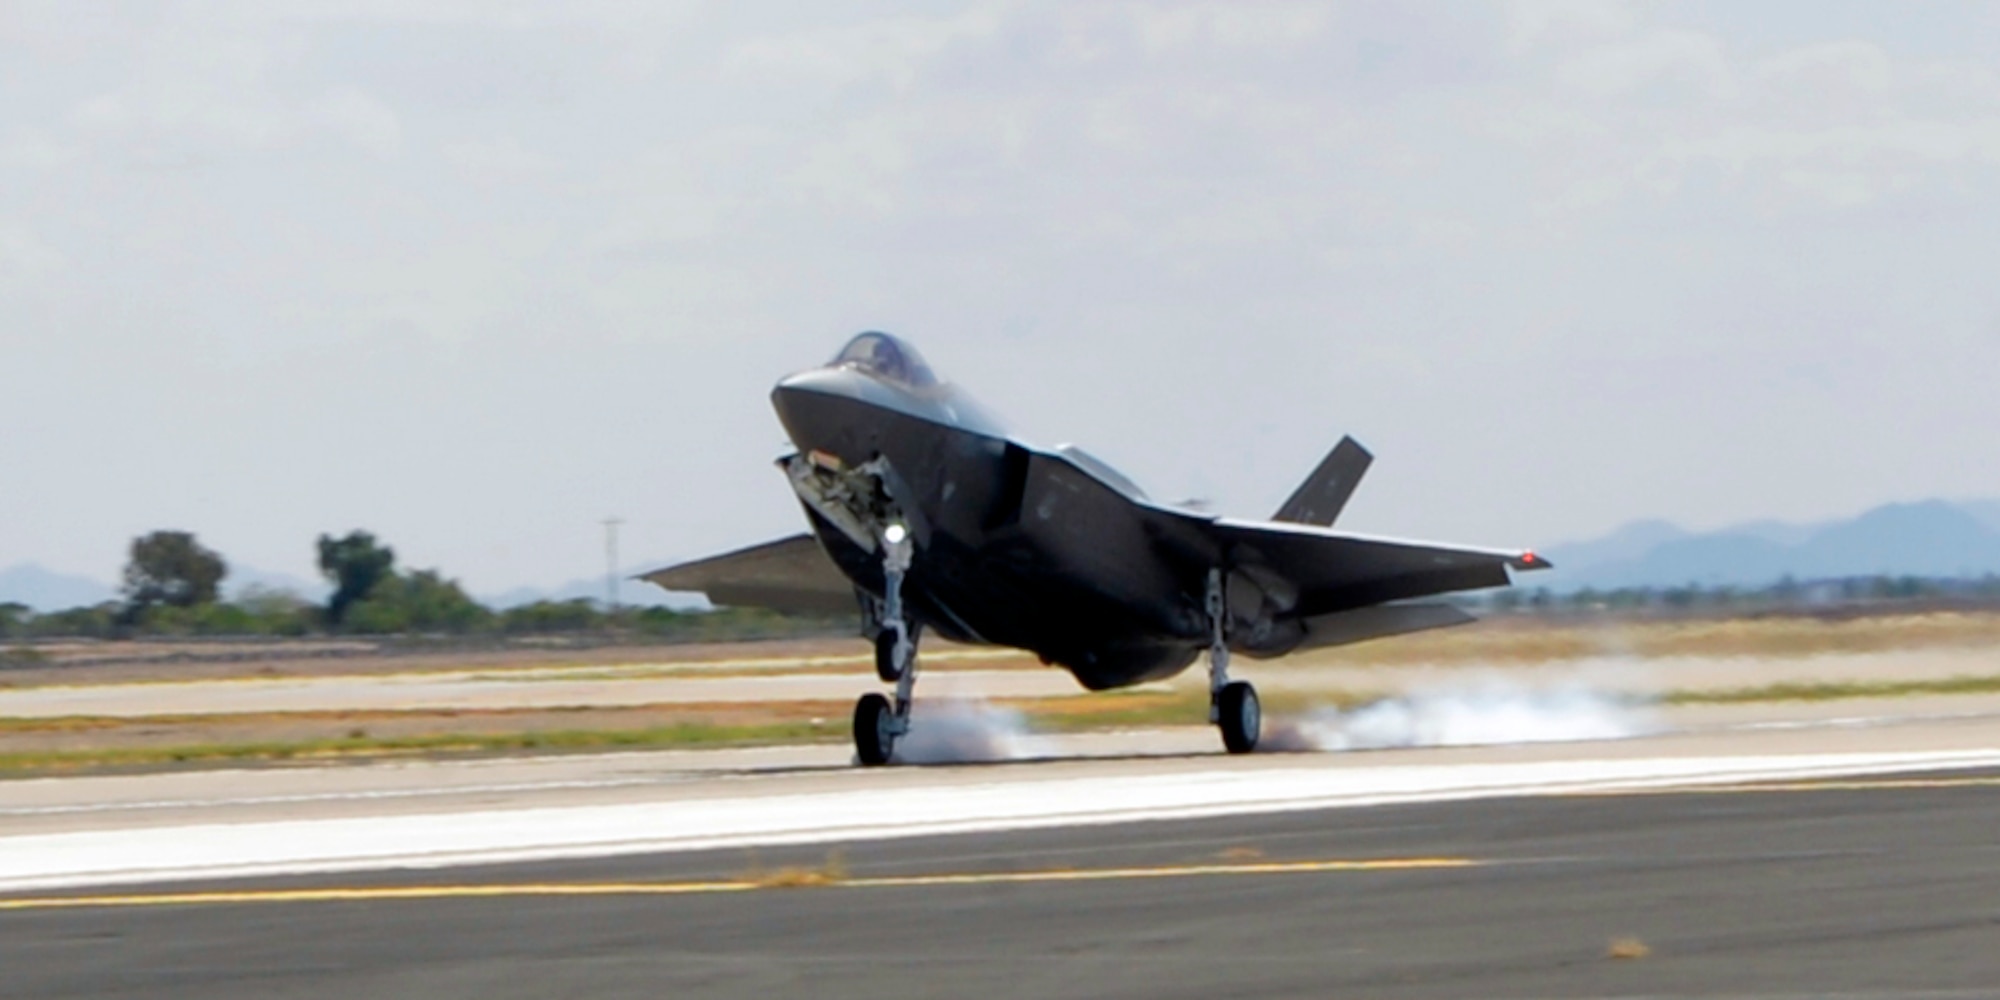 The Air Force’s 100th F-35 Lightning II lands atr Luke Air Force Base, Ariz, on Aug. 26, 2016. The aircraft, designated AF-100, marks a milestone for the F-35 program as it continues to grow, progress and support initial operational capabilities. (U.S. Air Force photo by Staff Sgt. Marcy Copeland)
